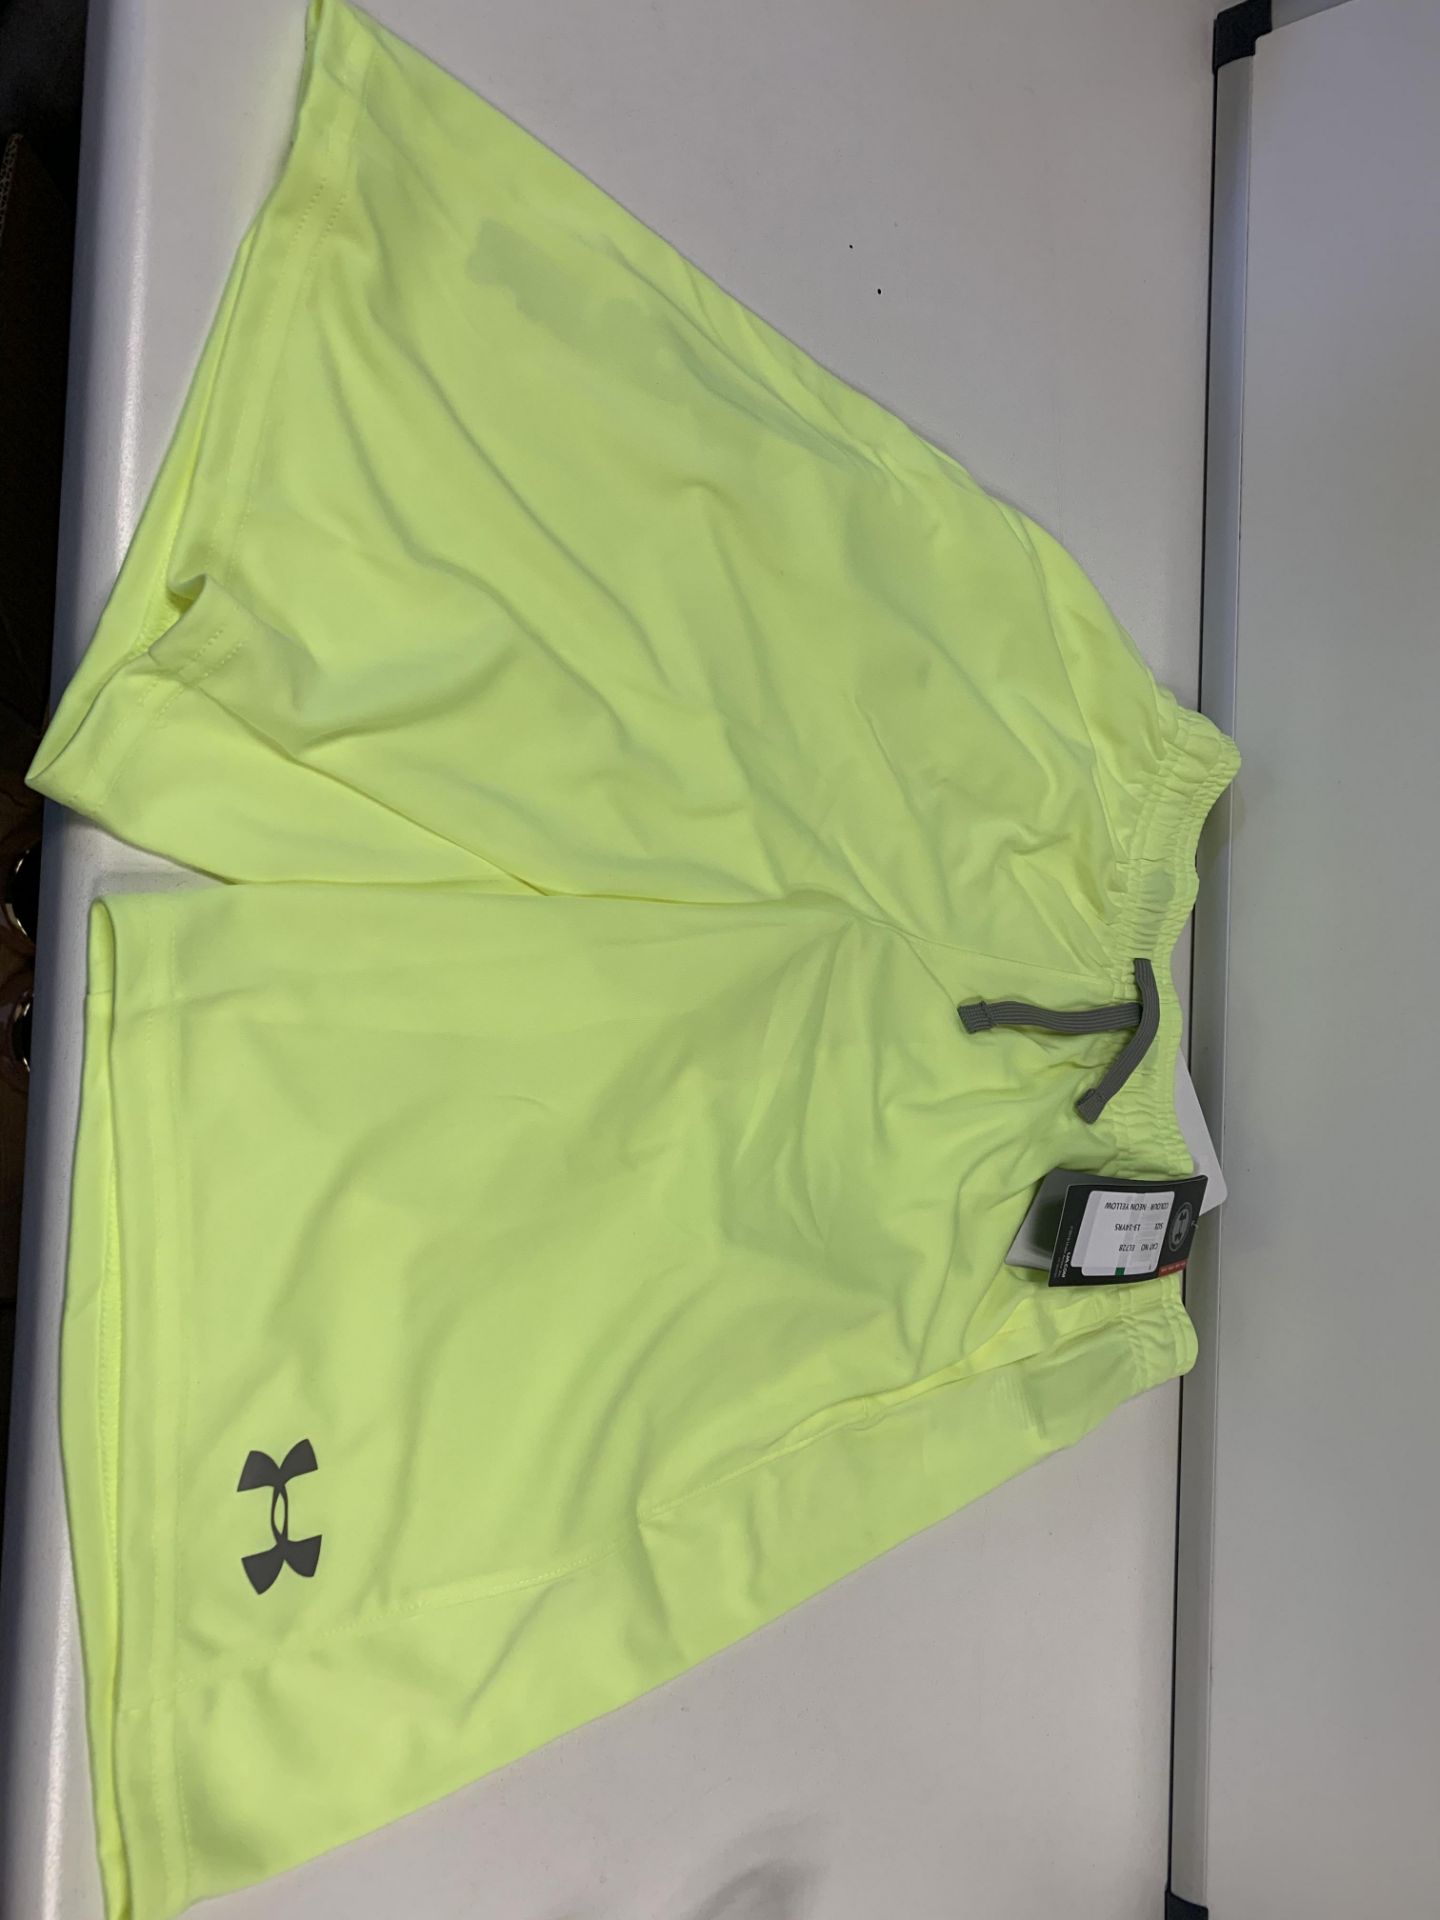 (NO VAT) 8 X BRAND NEW CHILDRENS UNDER ARMOUR NEON YELLOW SHORTS AGE 13-14 YEARS